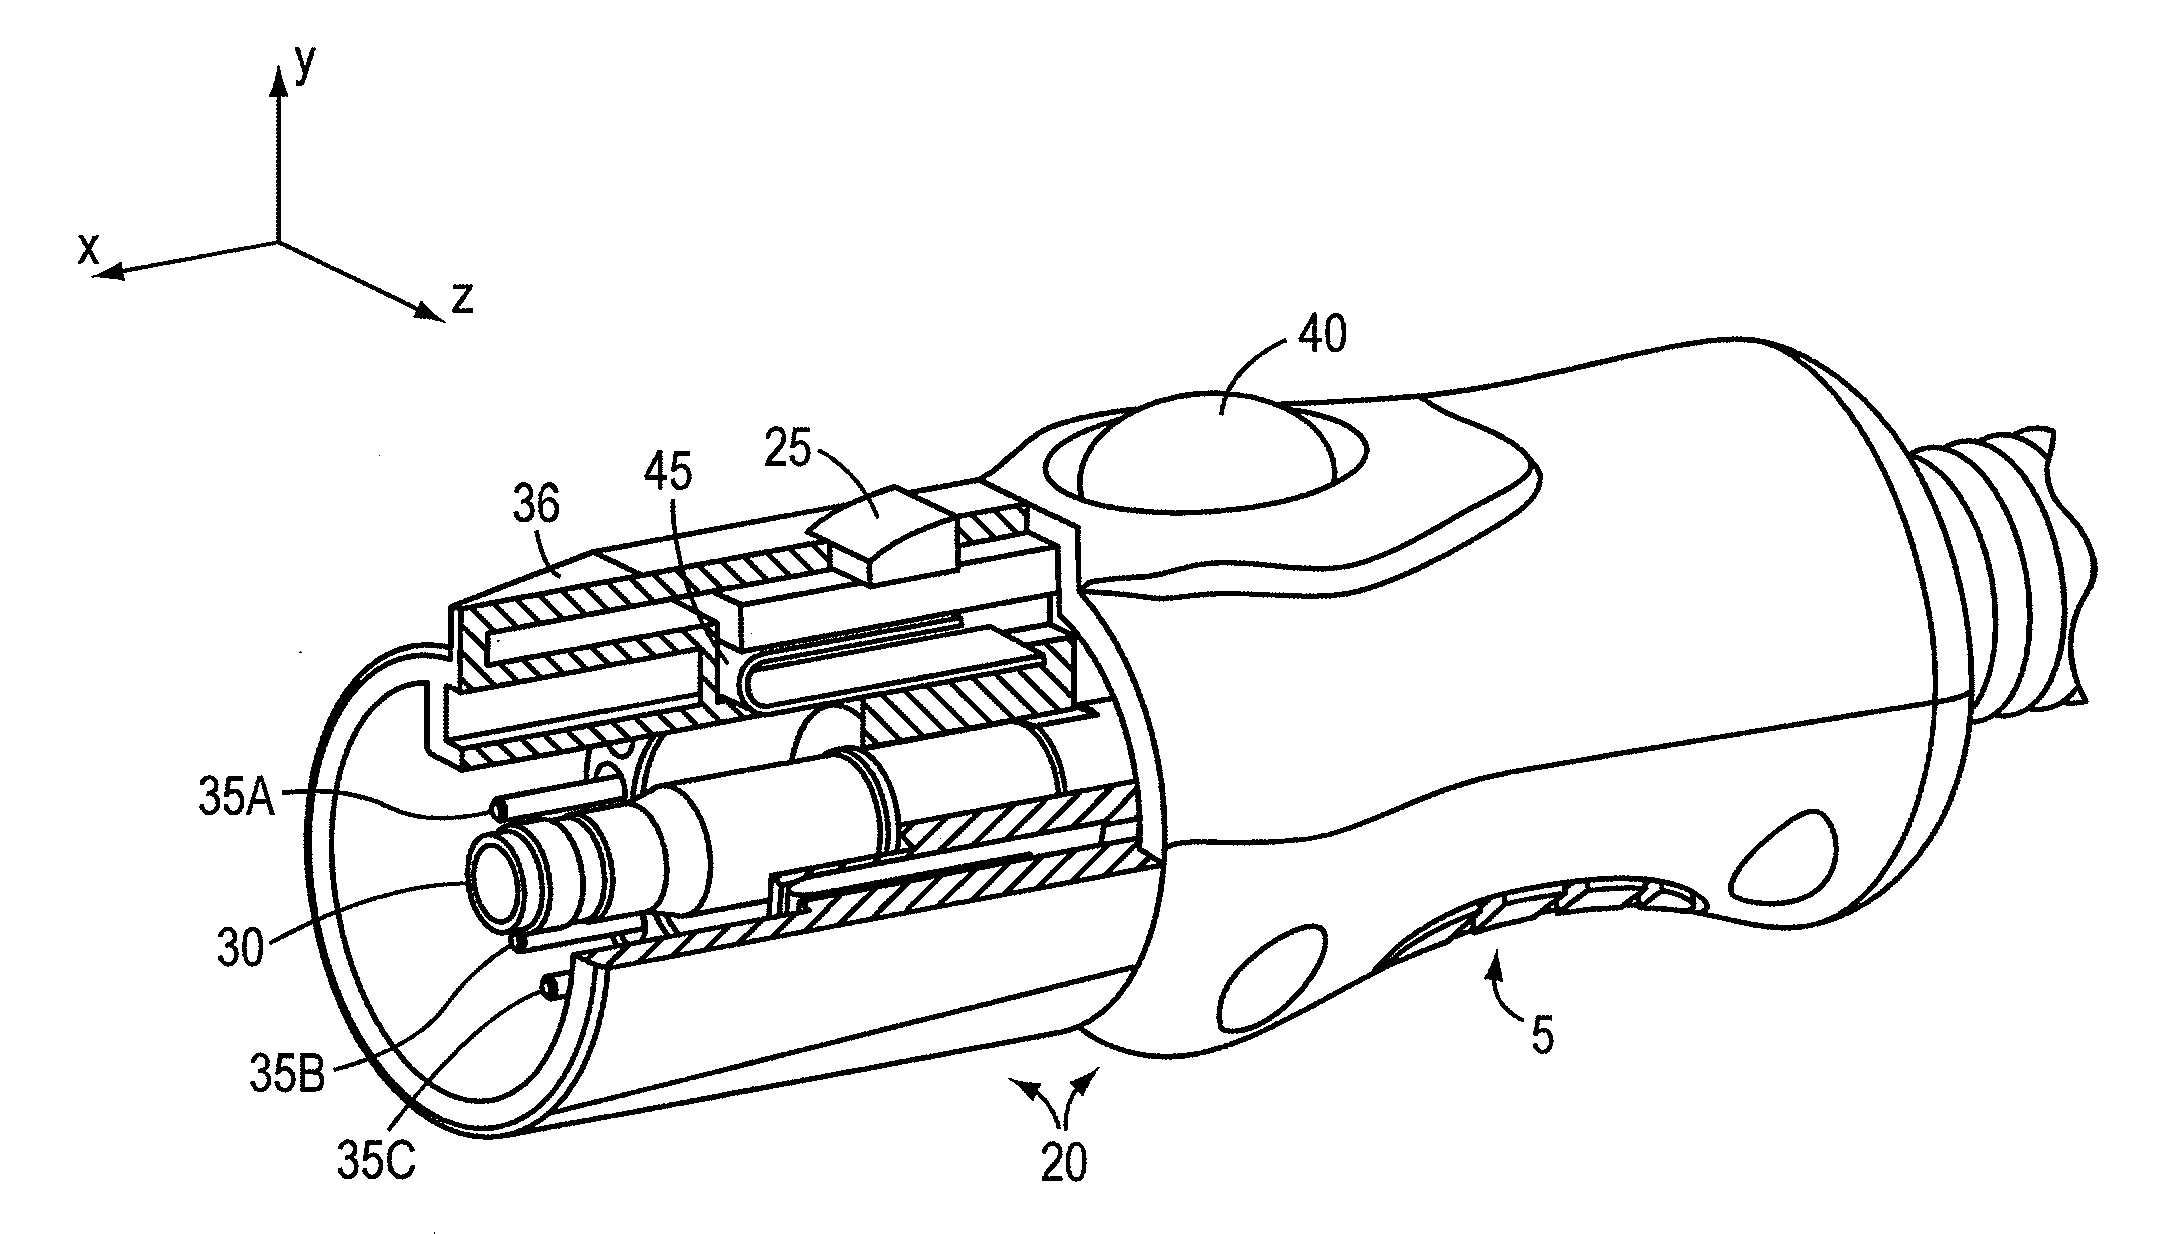 Connector for a Thermal Cutting System or Welding System